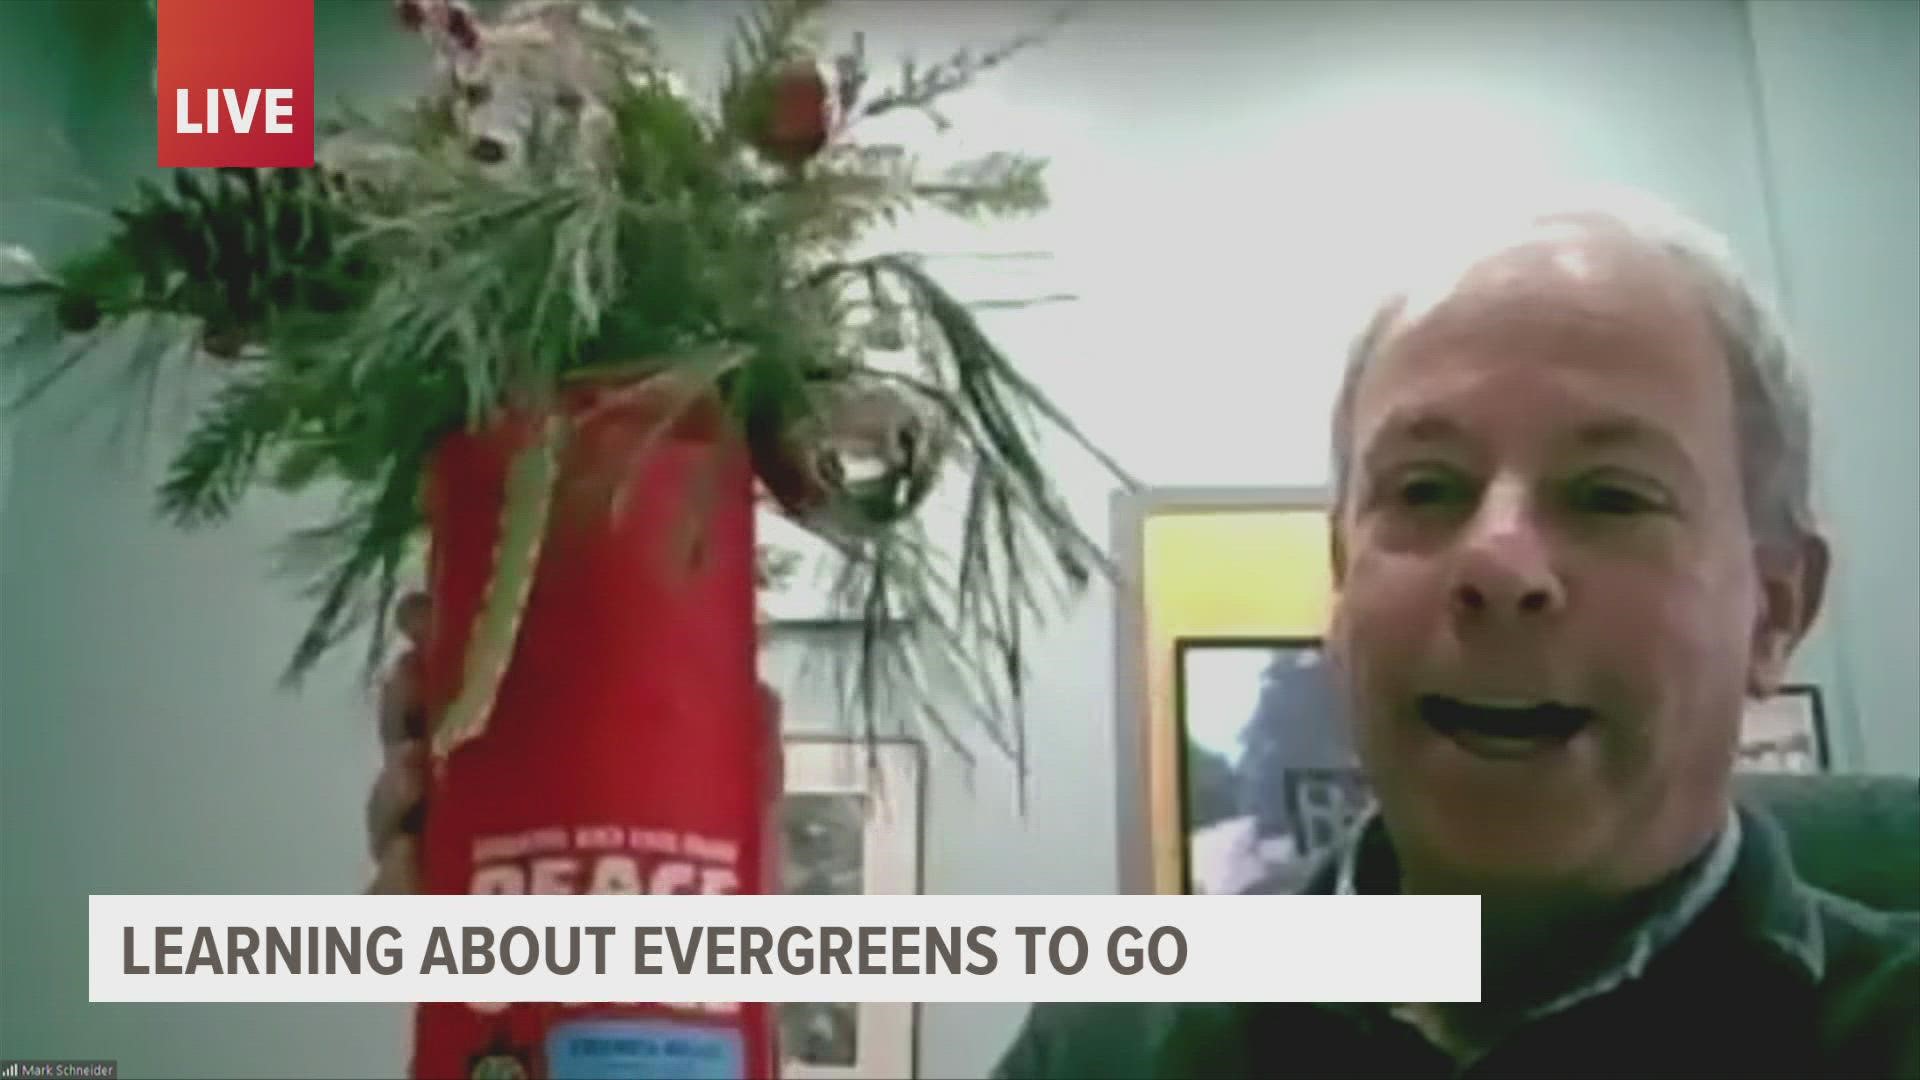 The arboretum's "Evergreens to Go" event is Dec. 4 from 9 a.m. to noon. 100% of proceeds will go toward revitalizing the arboretum's hosta collection.